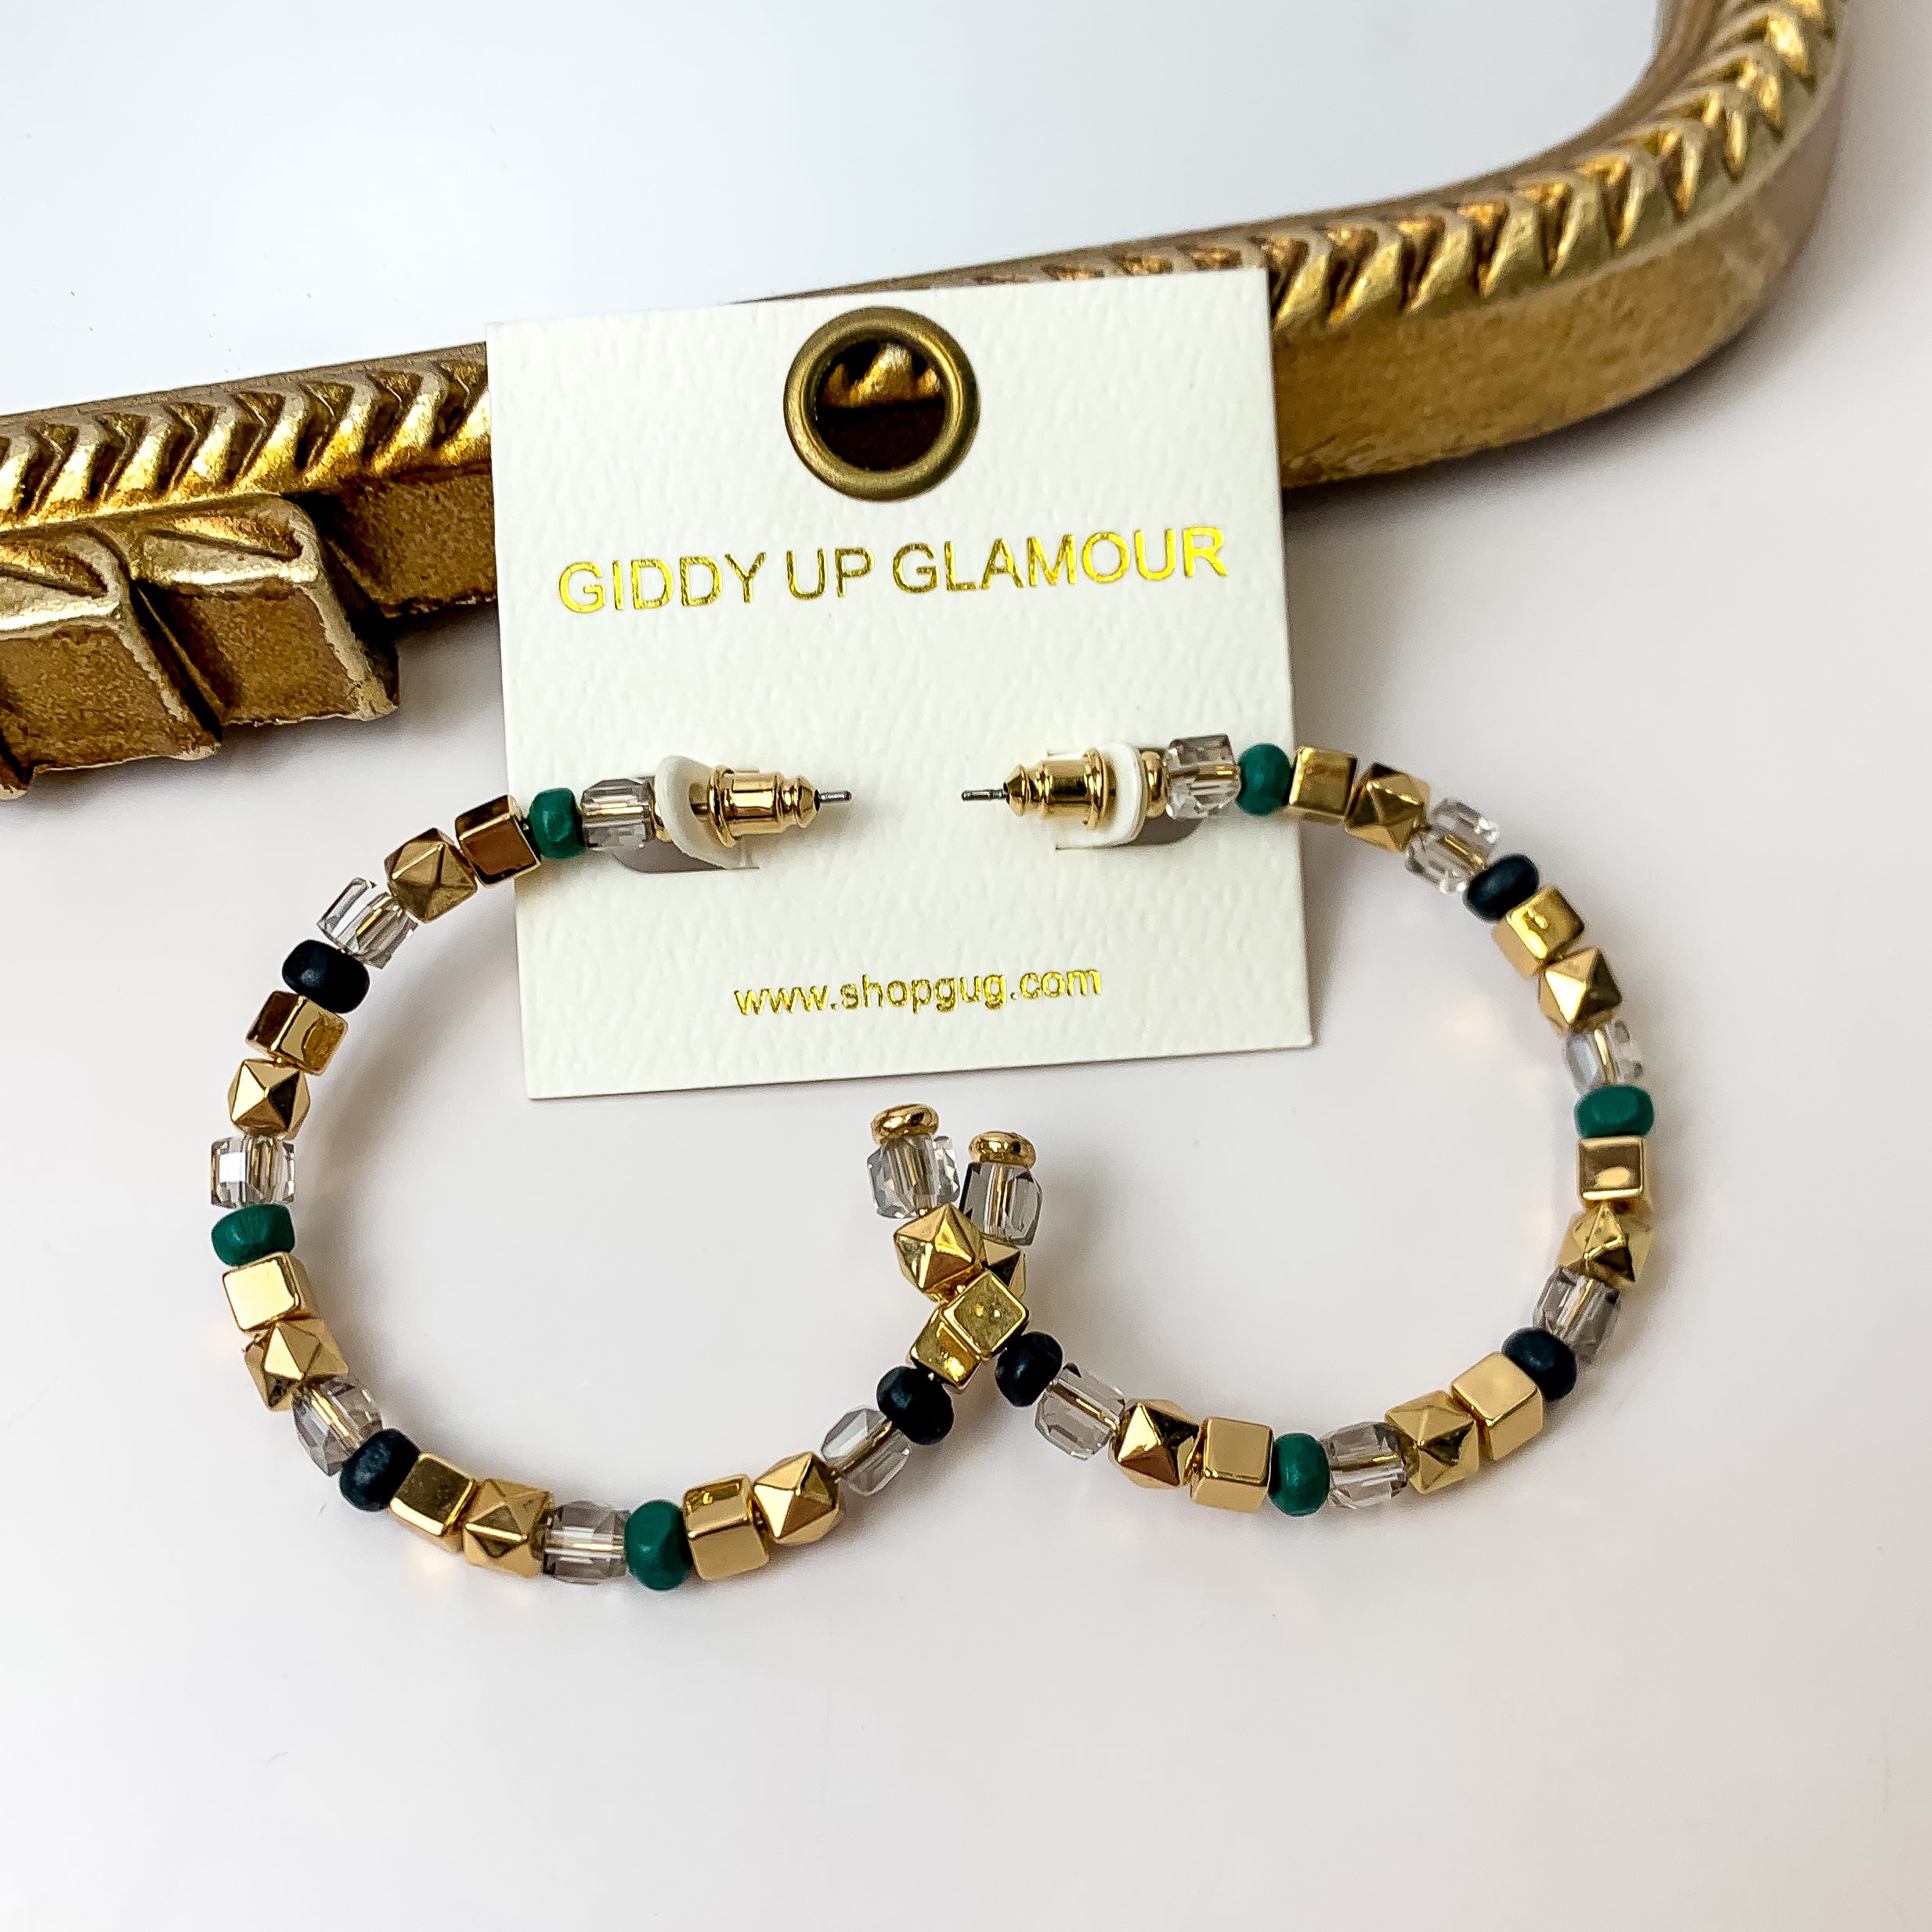 A pair of black, gold, and forest green beaded hoop earrings on an ivory earring card. These earrings are pictured on a white background with a gold mirror.